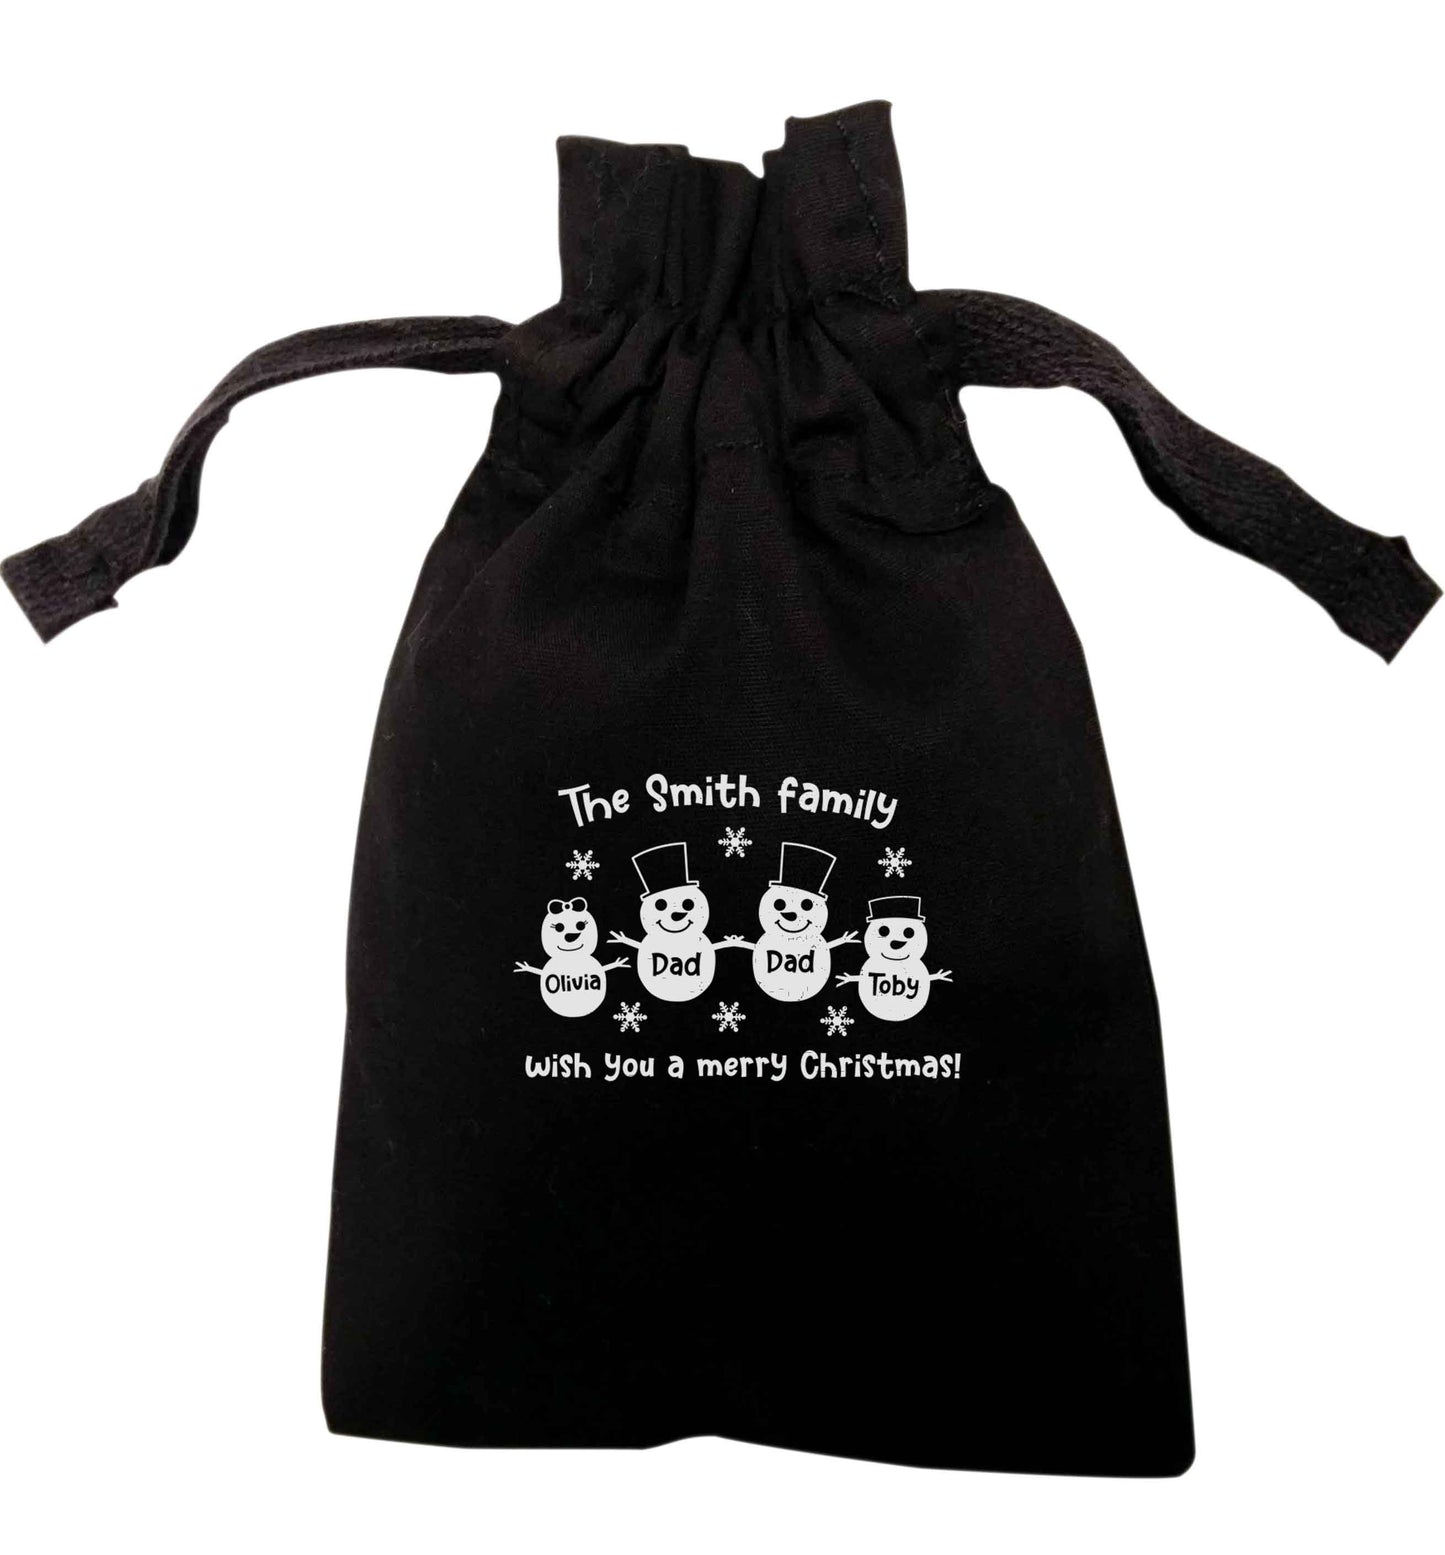 Personalised snowman family two dads | XS - L | Pouch / Drawstring bag / Sack | Organic Cotton | Bulk discounts available!